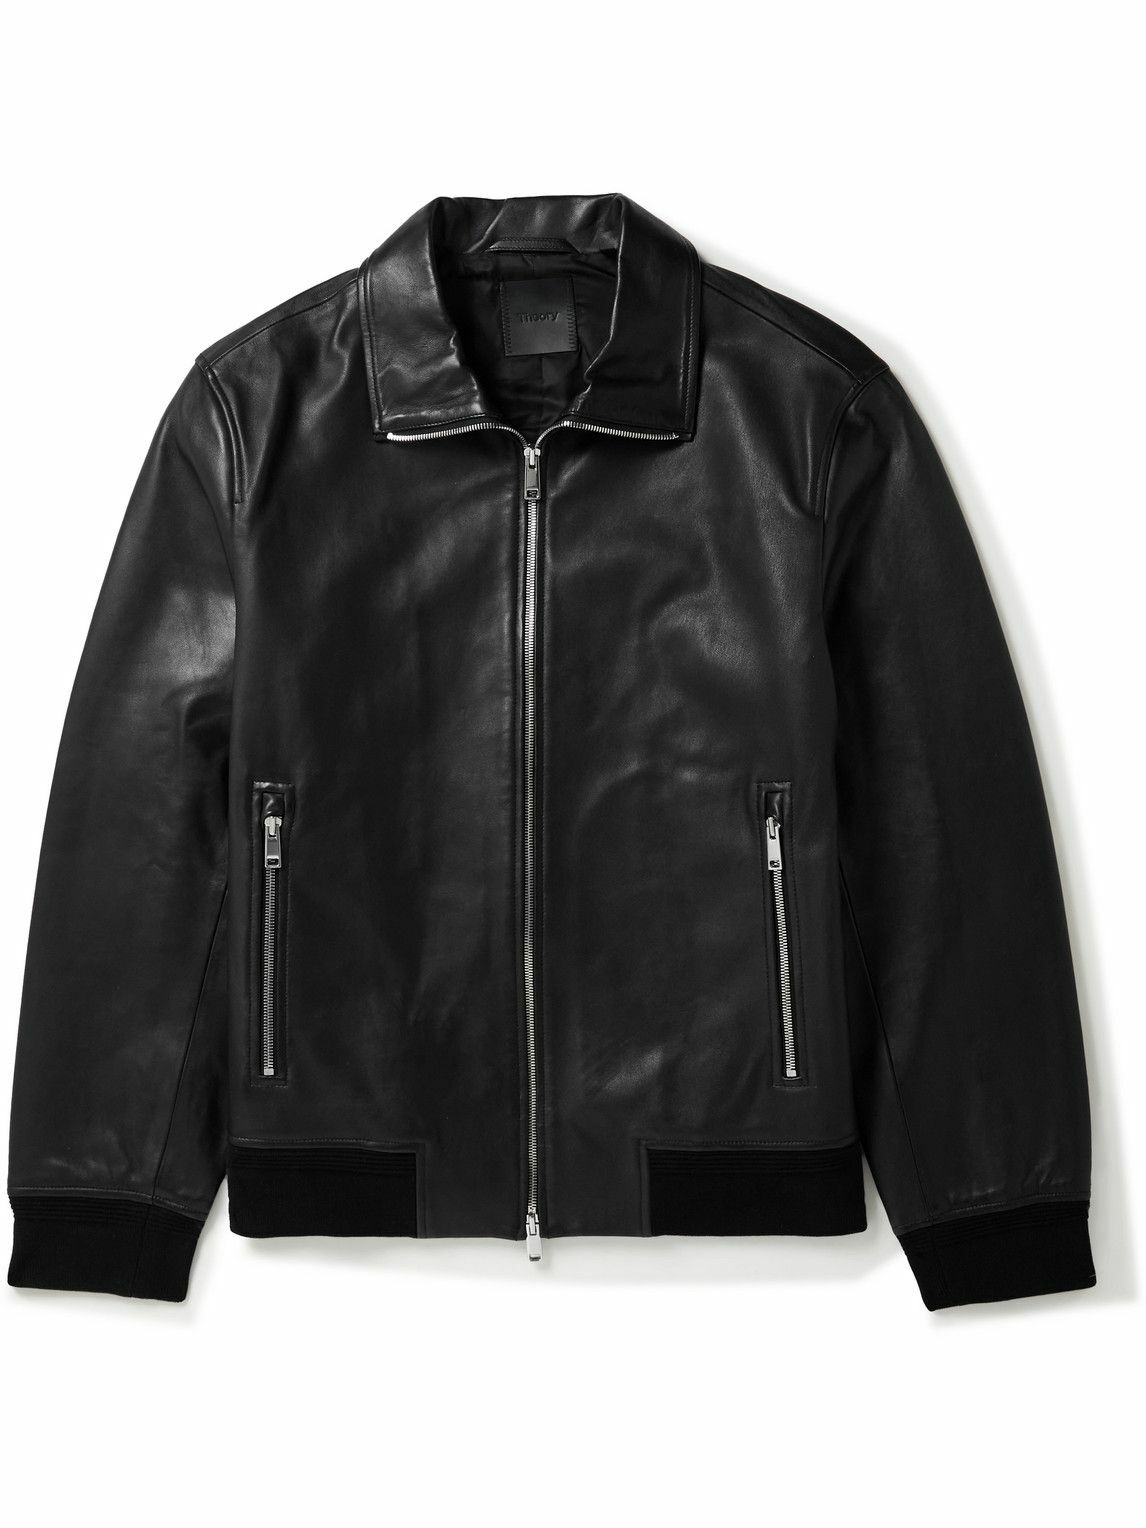 Theory - Marco Leather Jacket - Black Theory